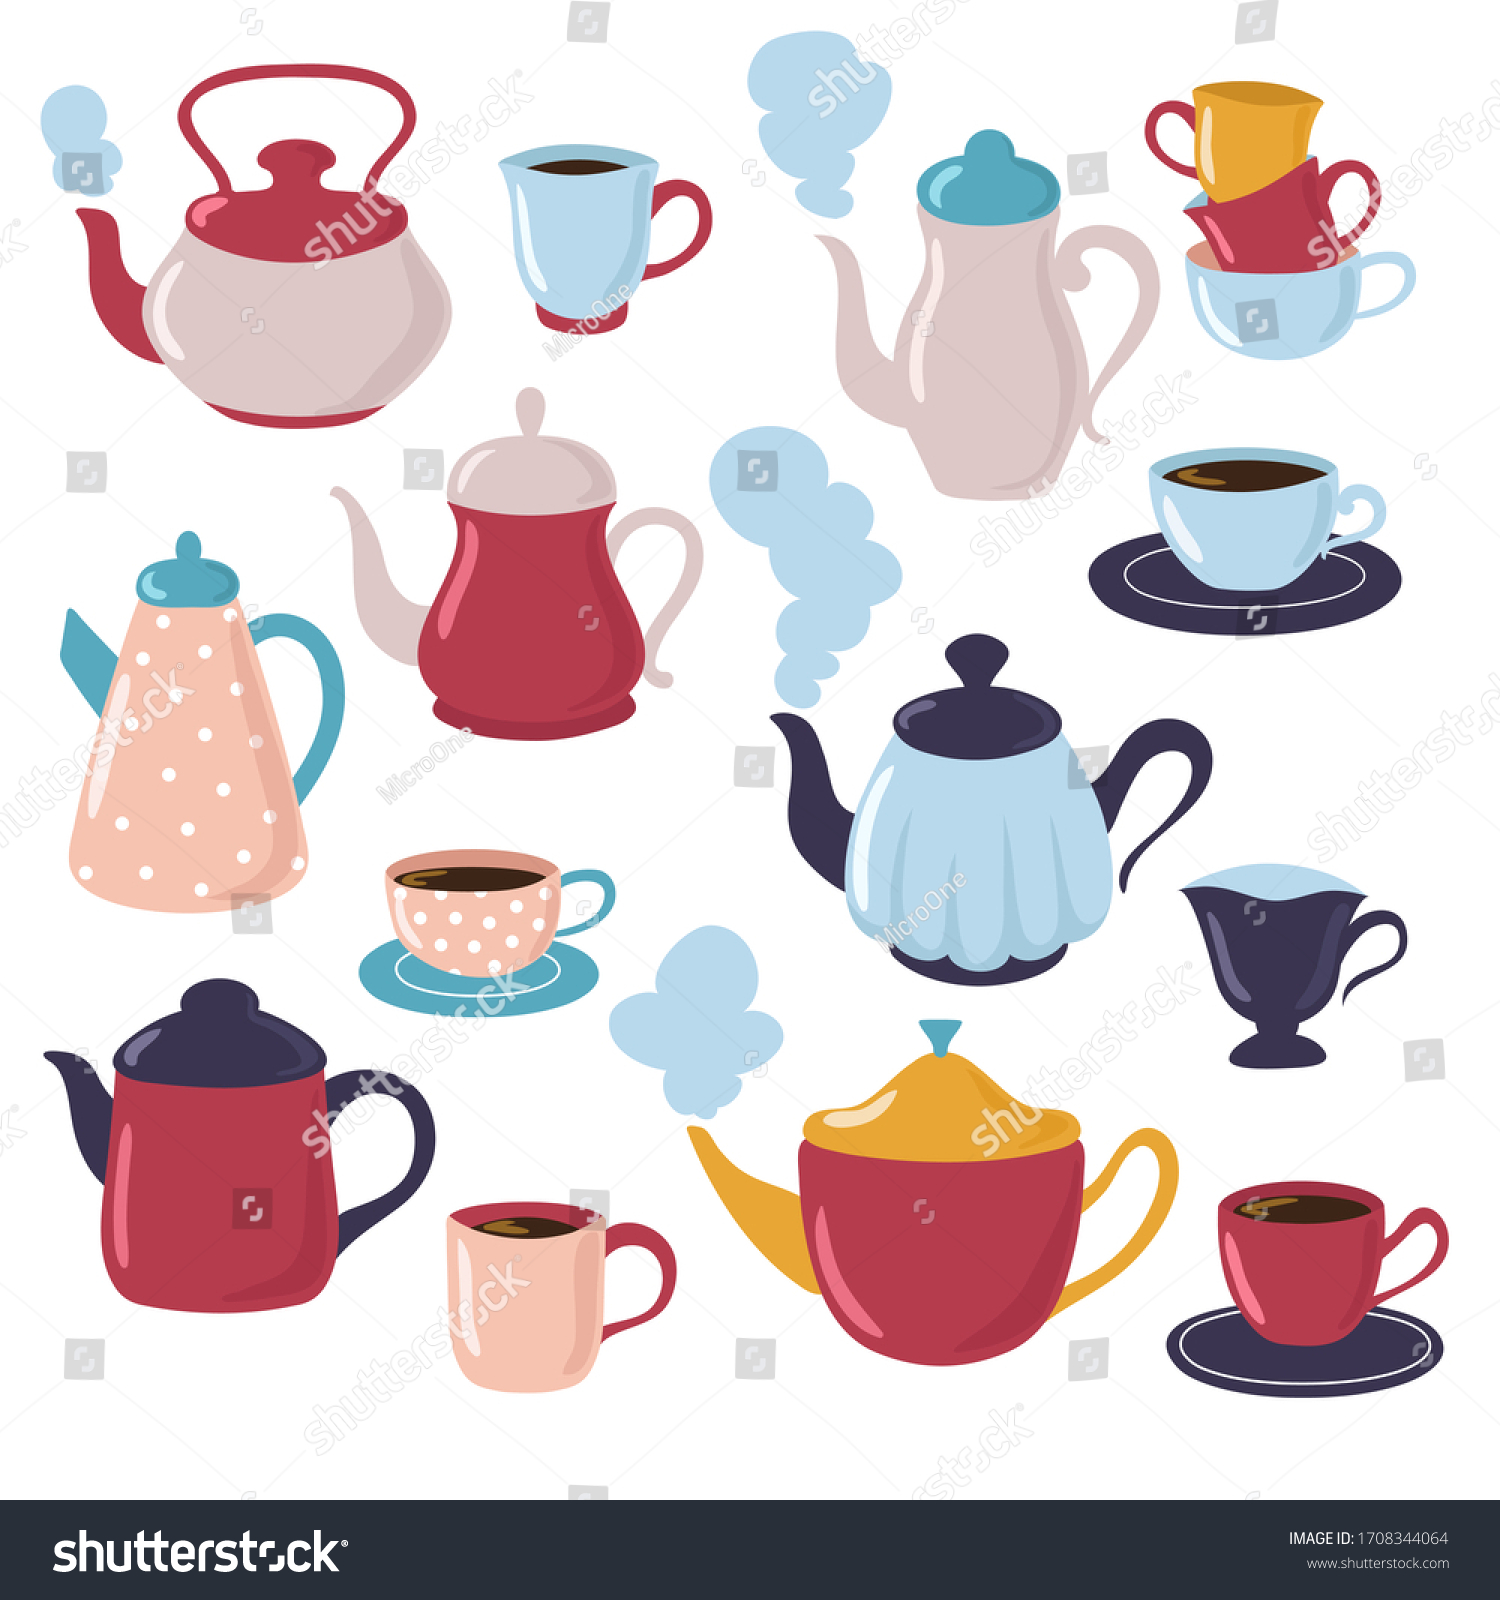 Teapot and cup collection. Cartoon water kettle and porcelain cups with tea. Kitchenware set #1708344064